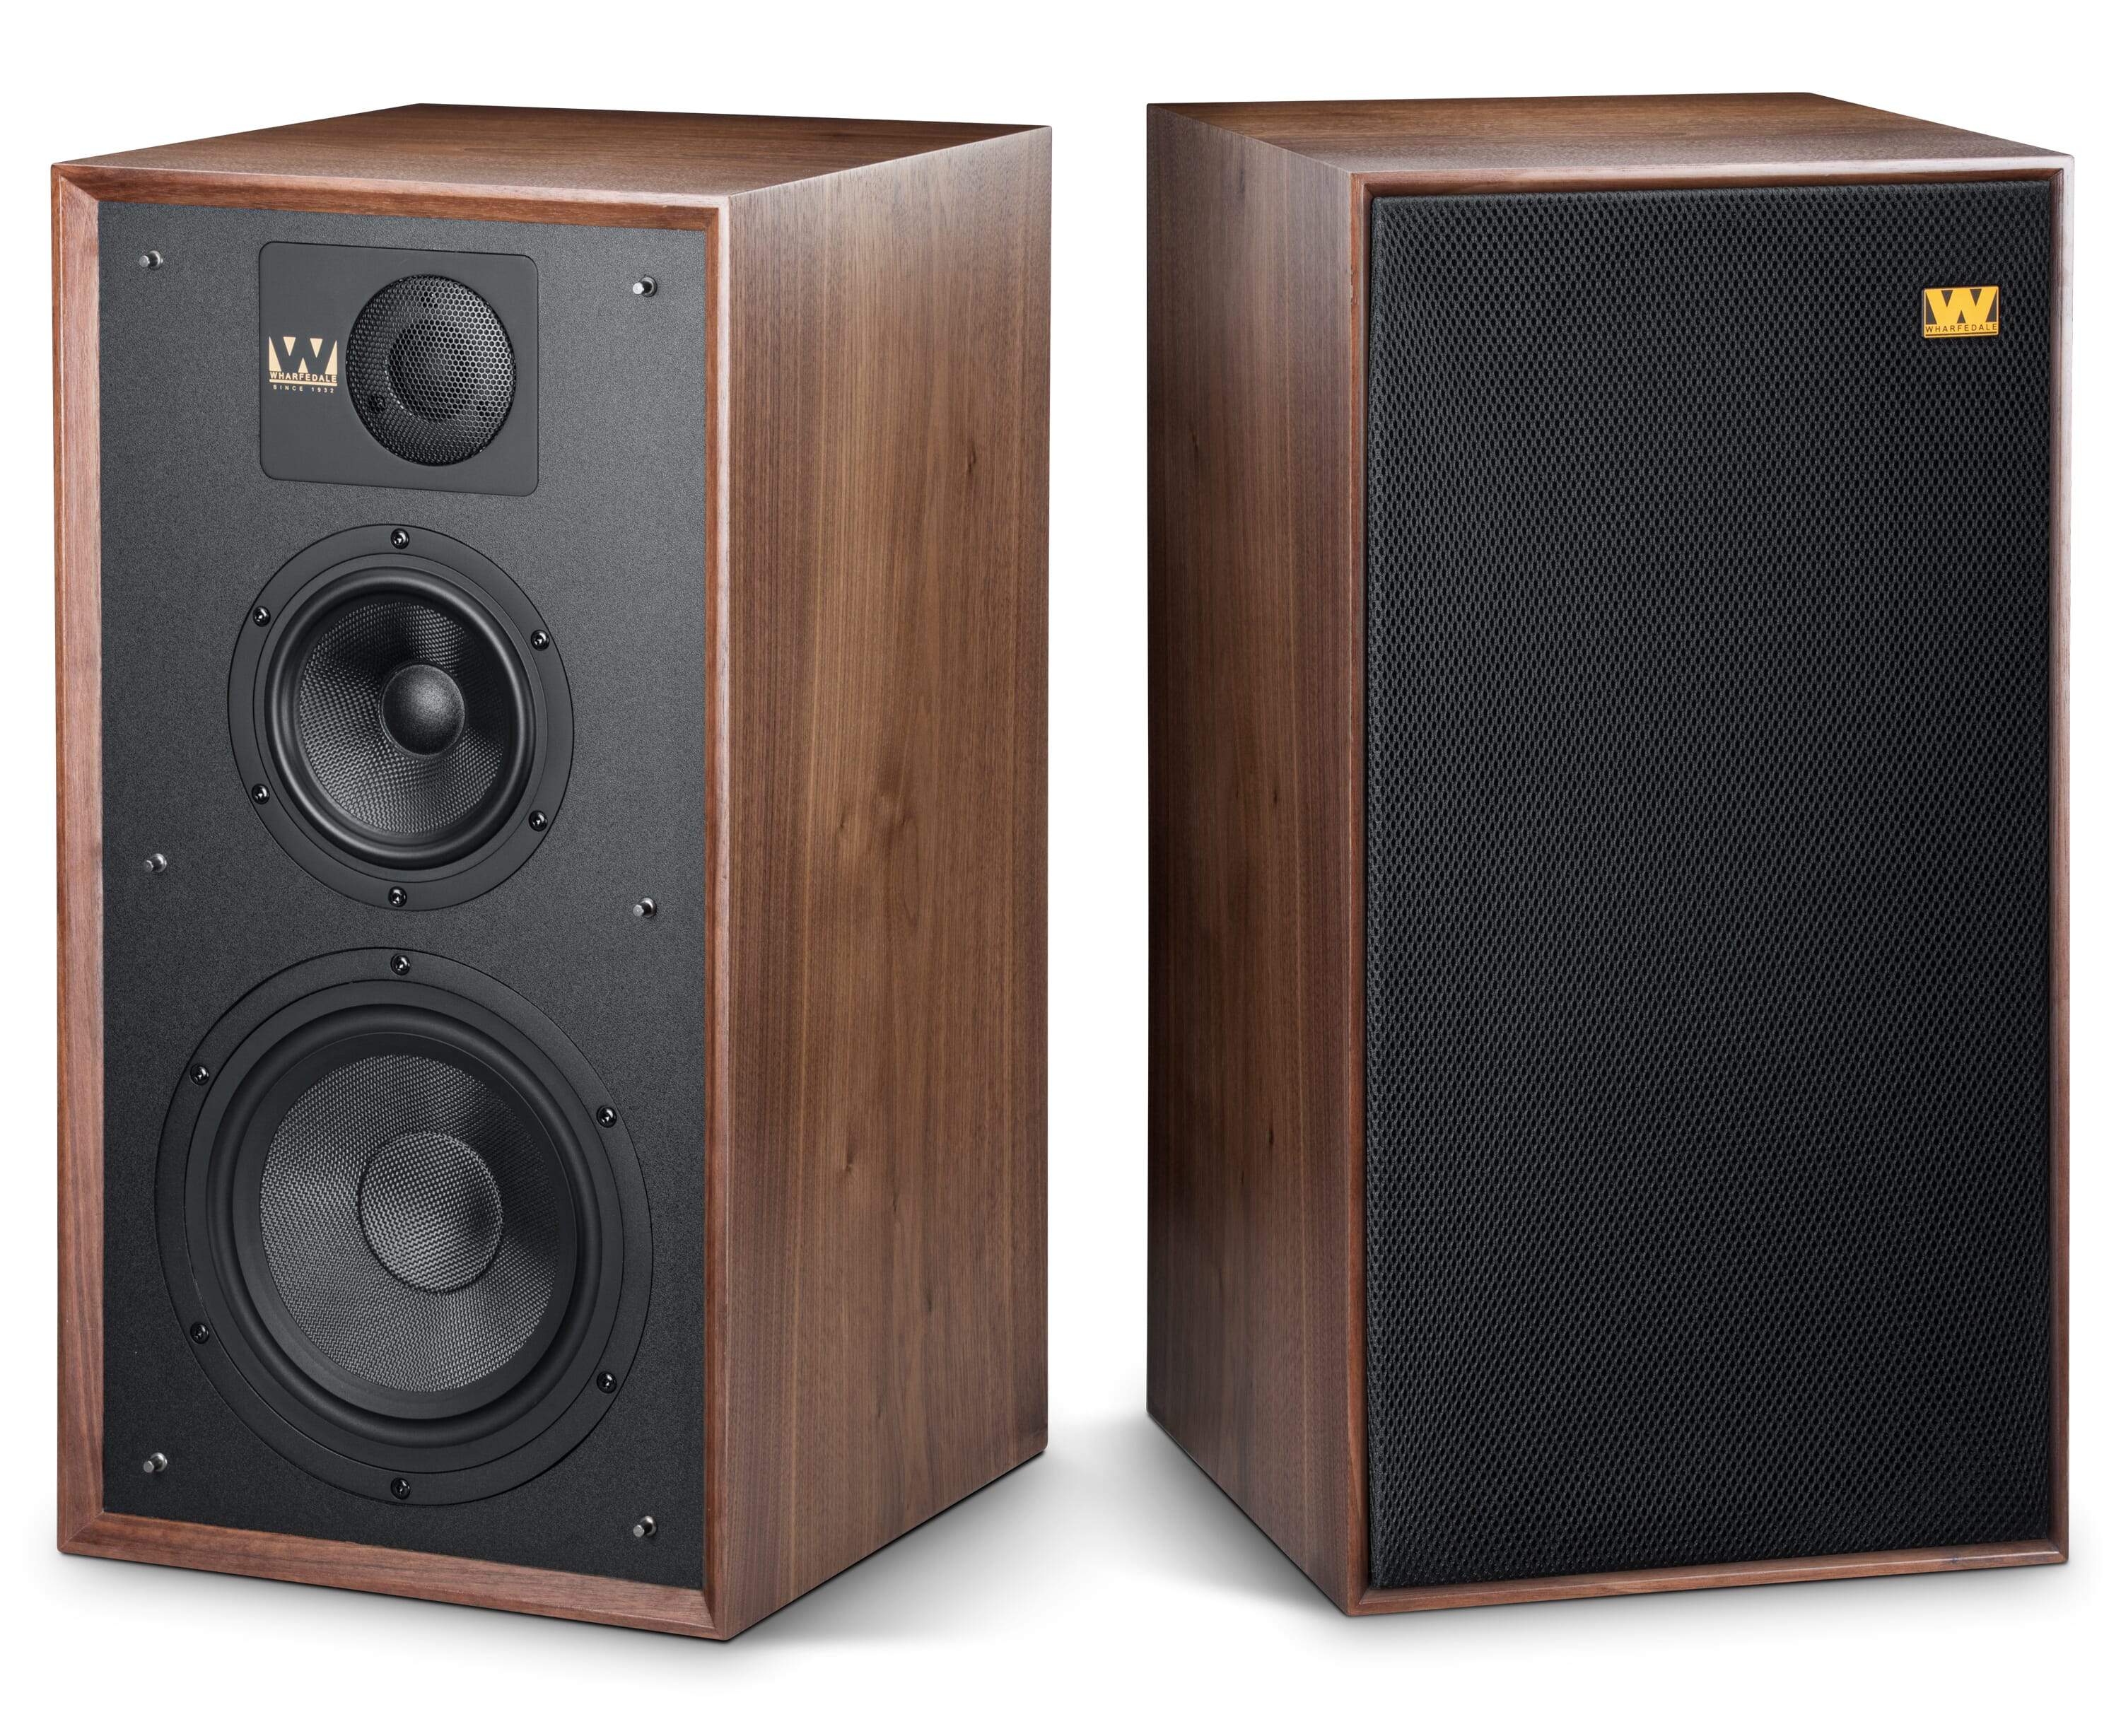 Wharfedale Linton 85th Anniversary Speakers (available to demo)